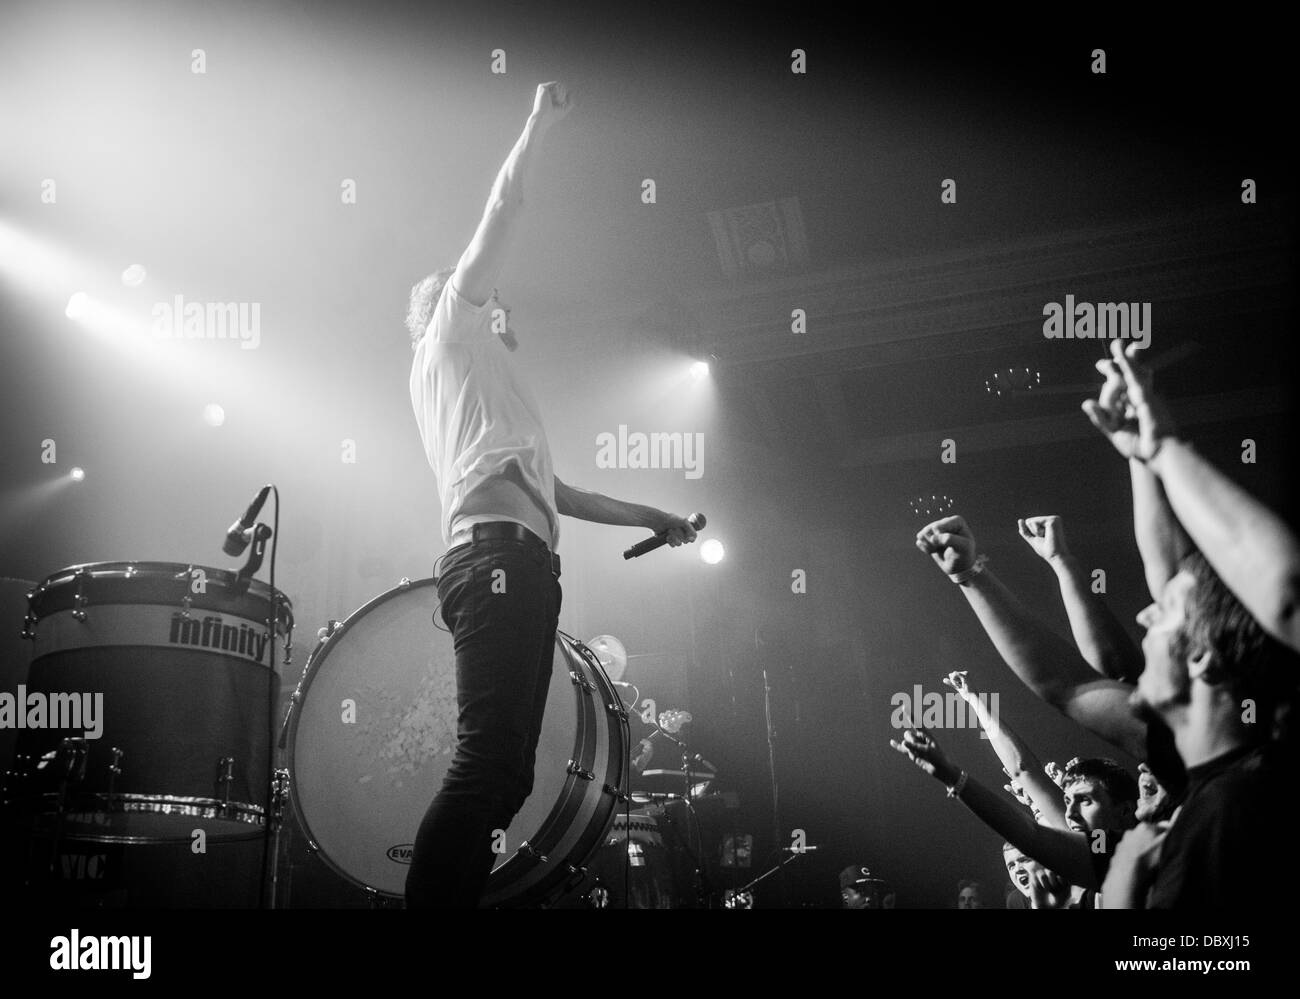 Imagine Dragons performing live at Metro in Chicago, IL Stock Photo